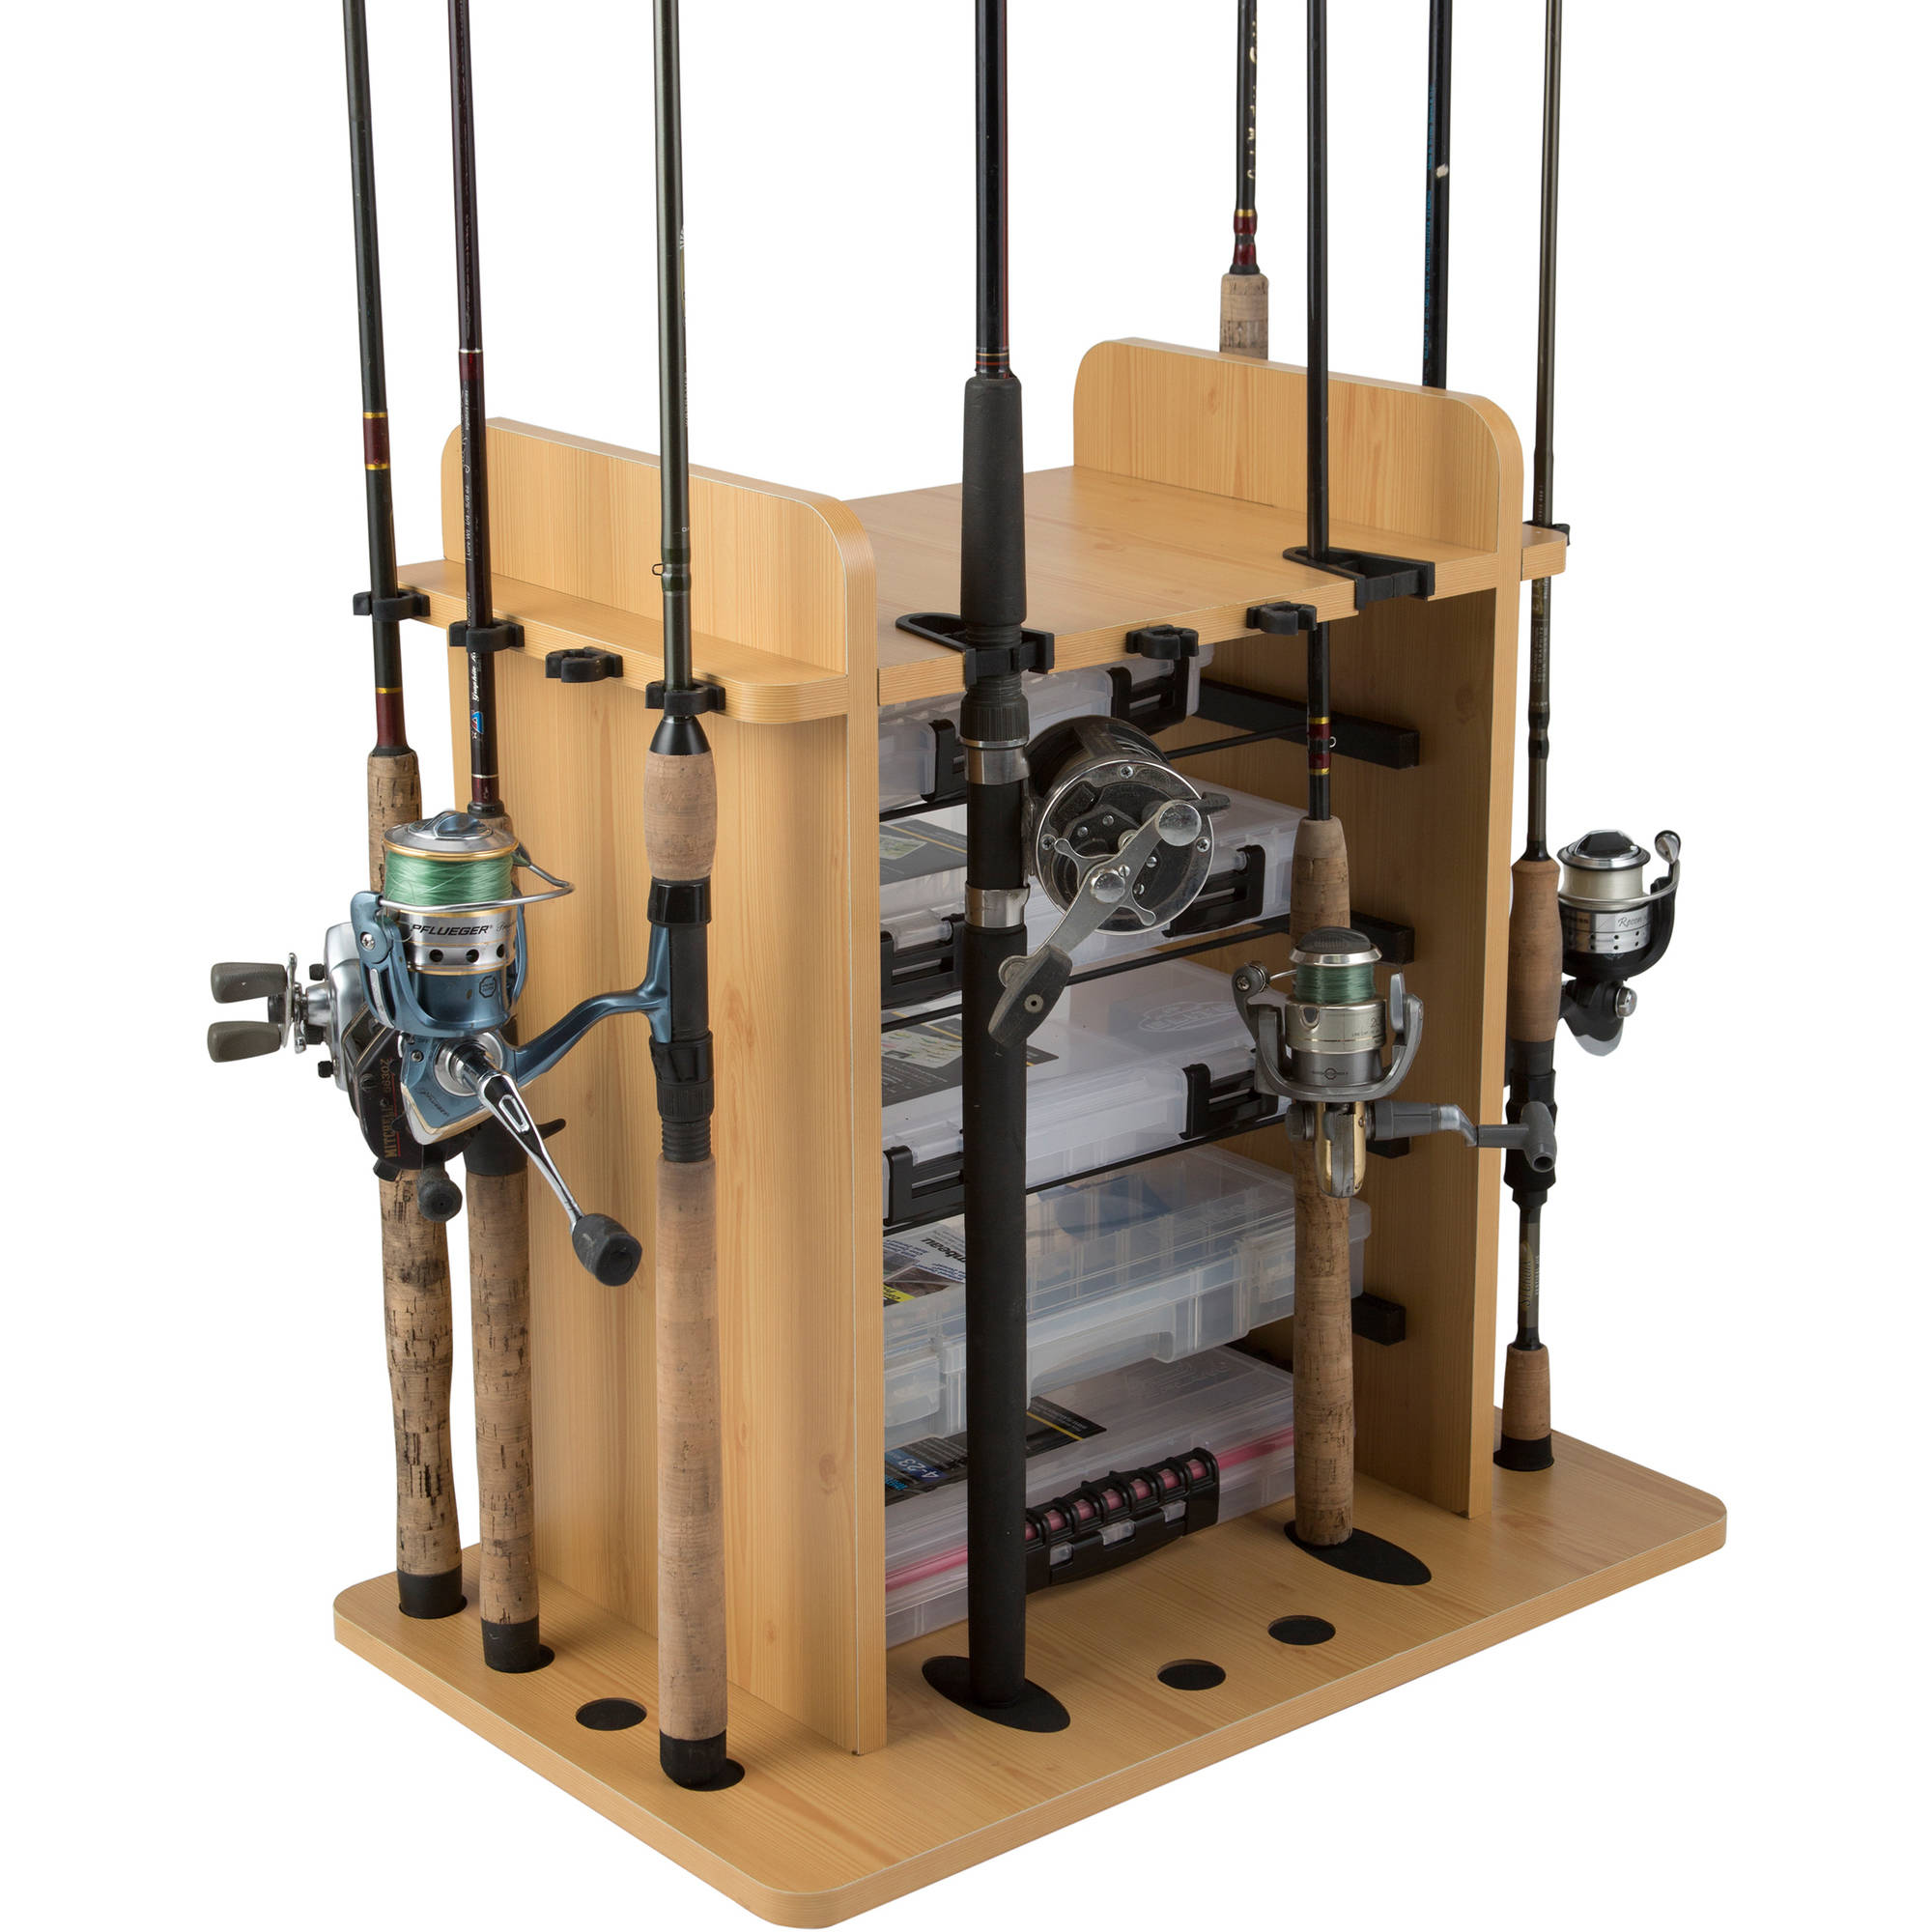 Rush Creek Creations 14 Fishing Rod Rack with 4 Utility Box Storage Capacity & Dual Rod Clips - Features a Sleek Design & Wire Racking System - image 1 of 8